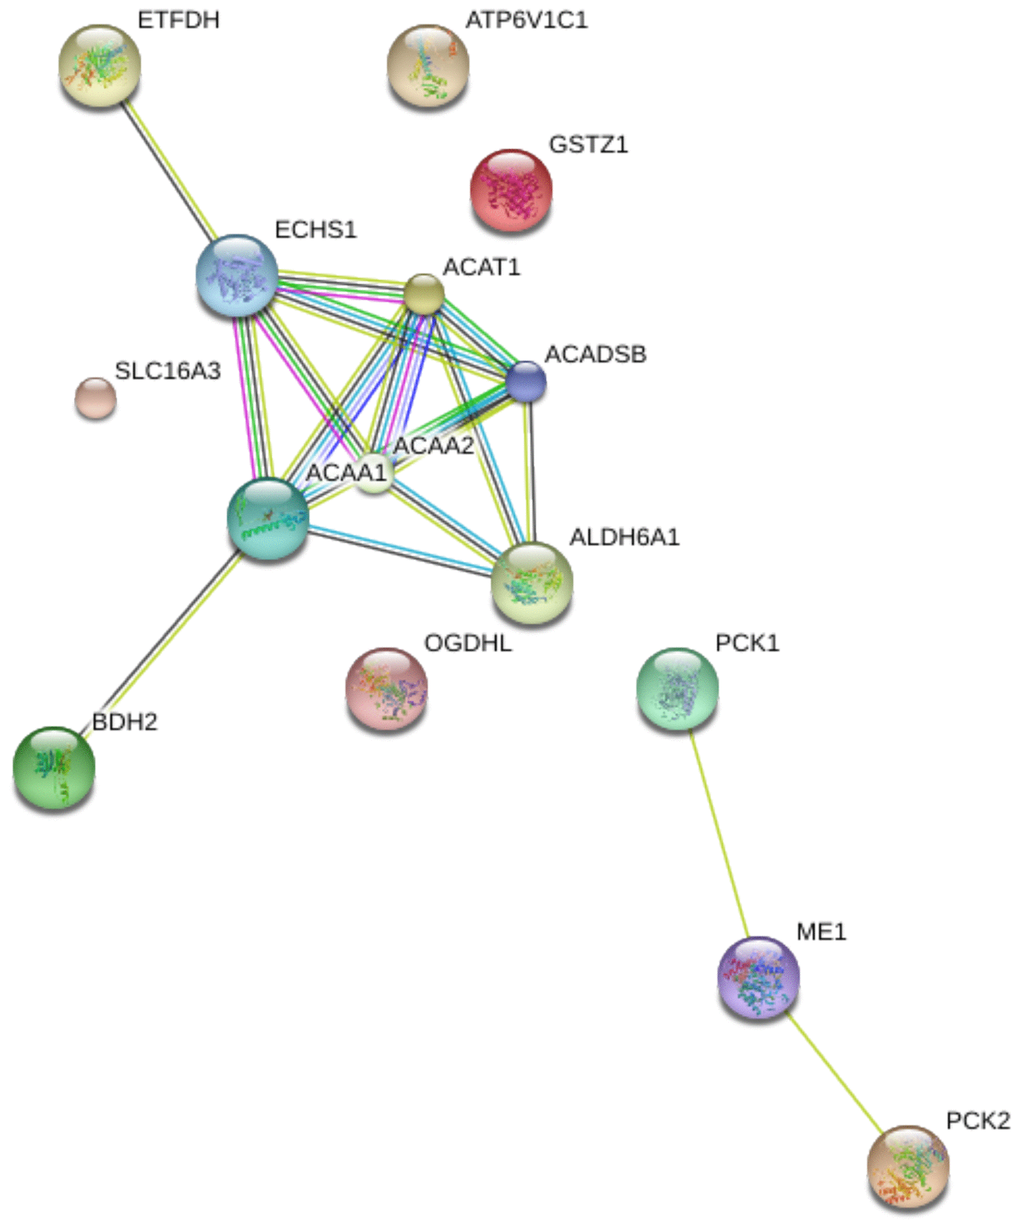 Protein-protein interaction (PPI) network of 15 differentially expressed genes in aerobic respiration.